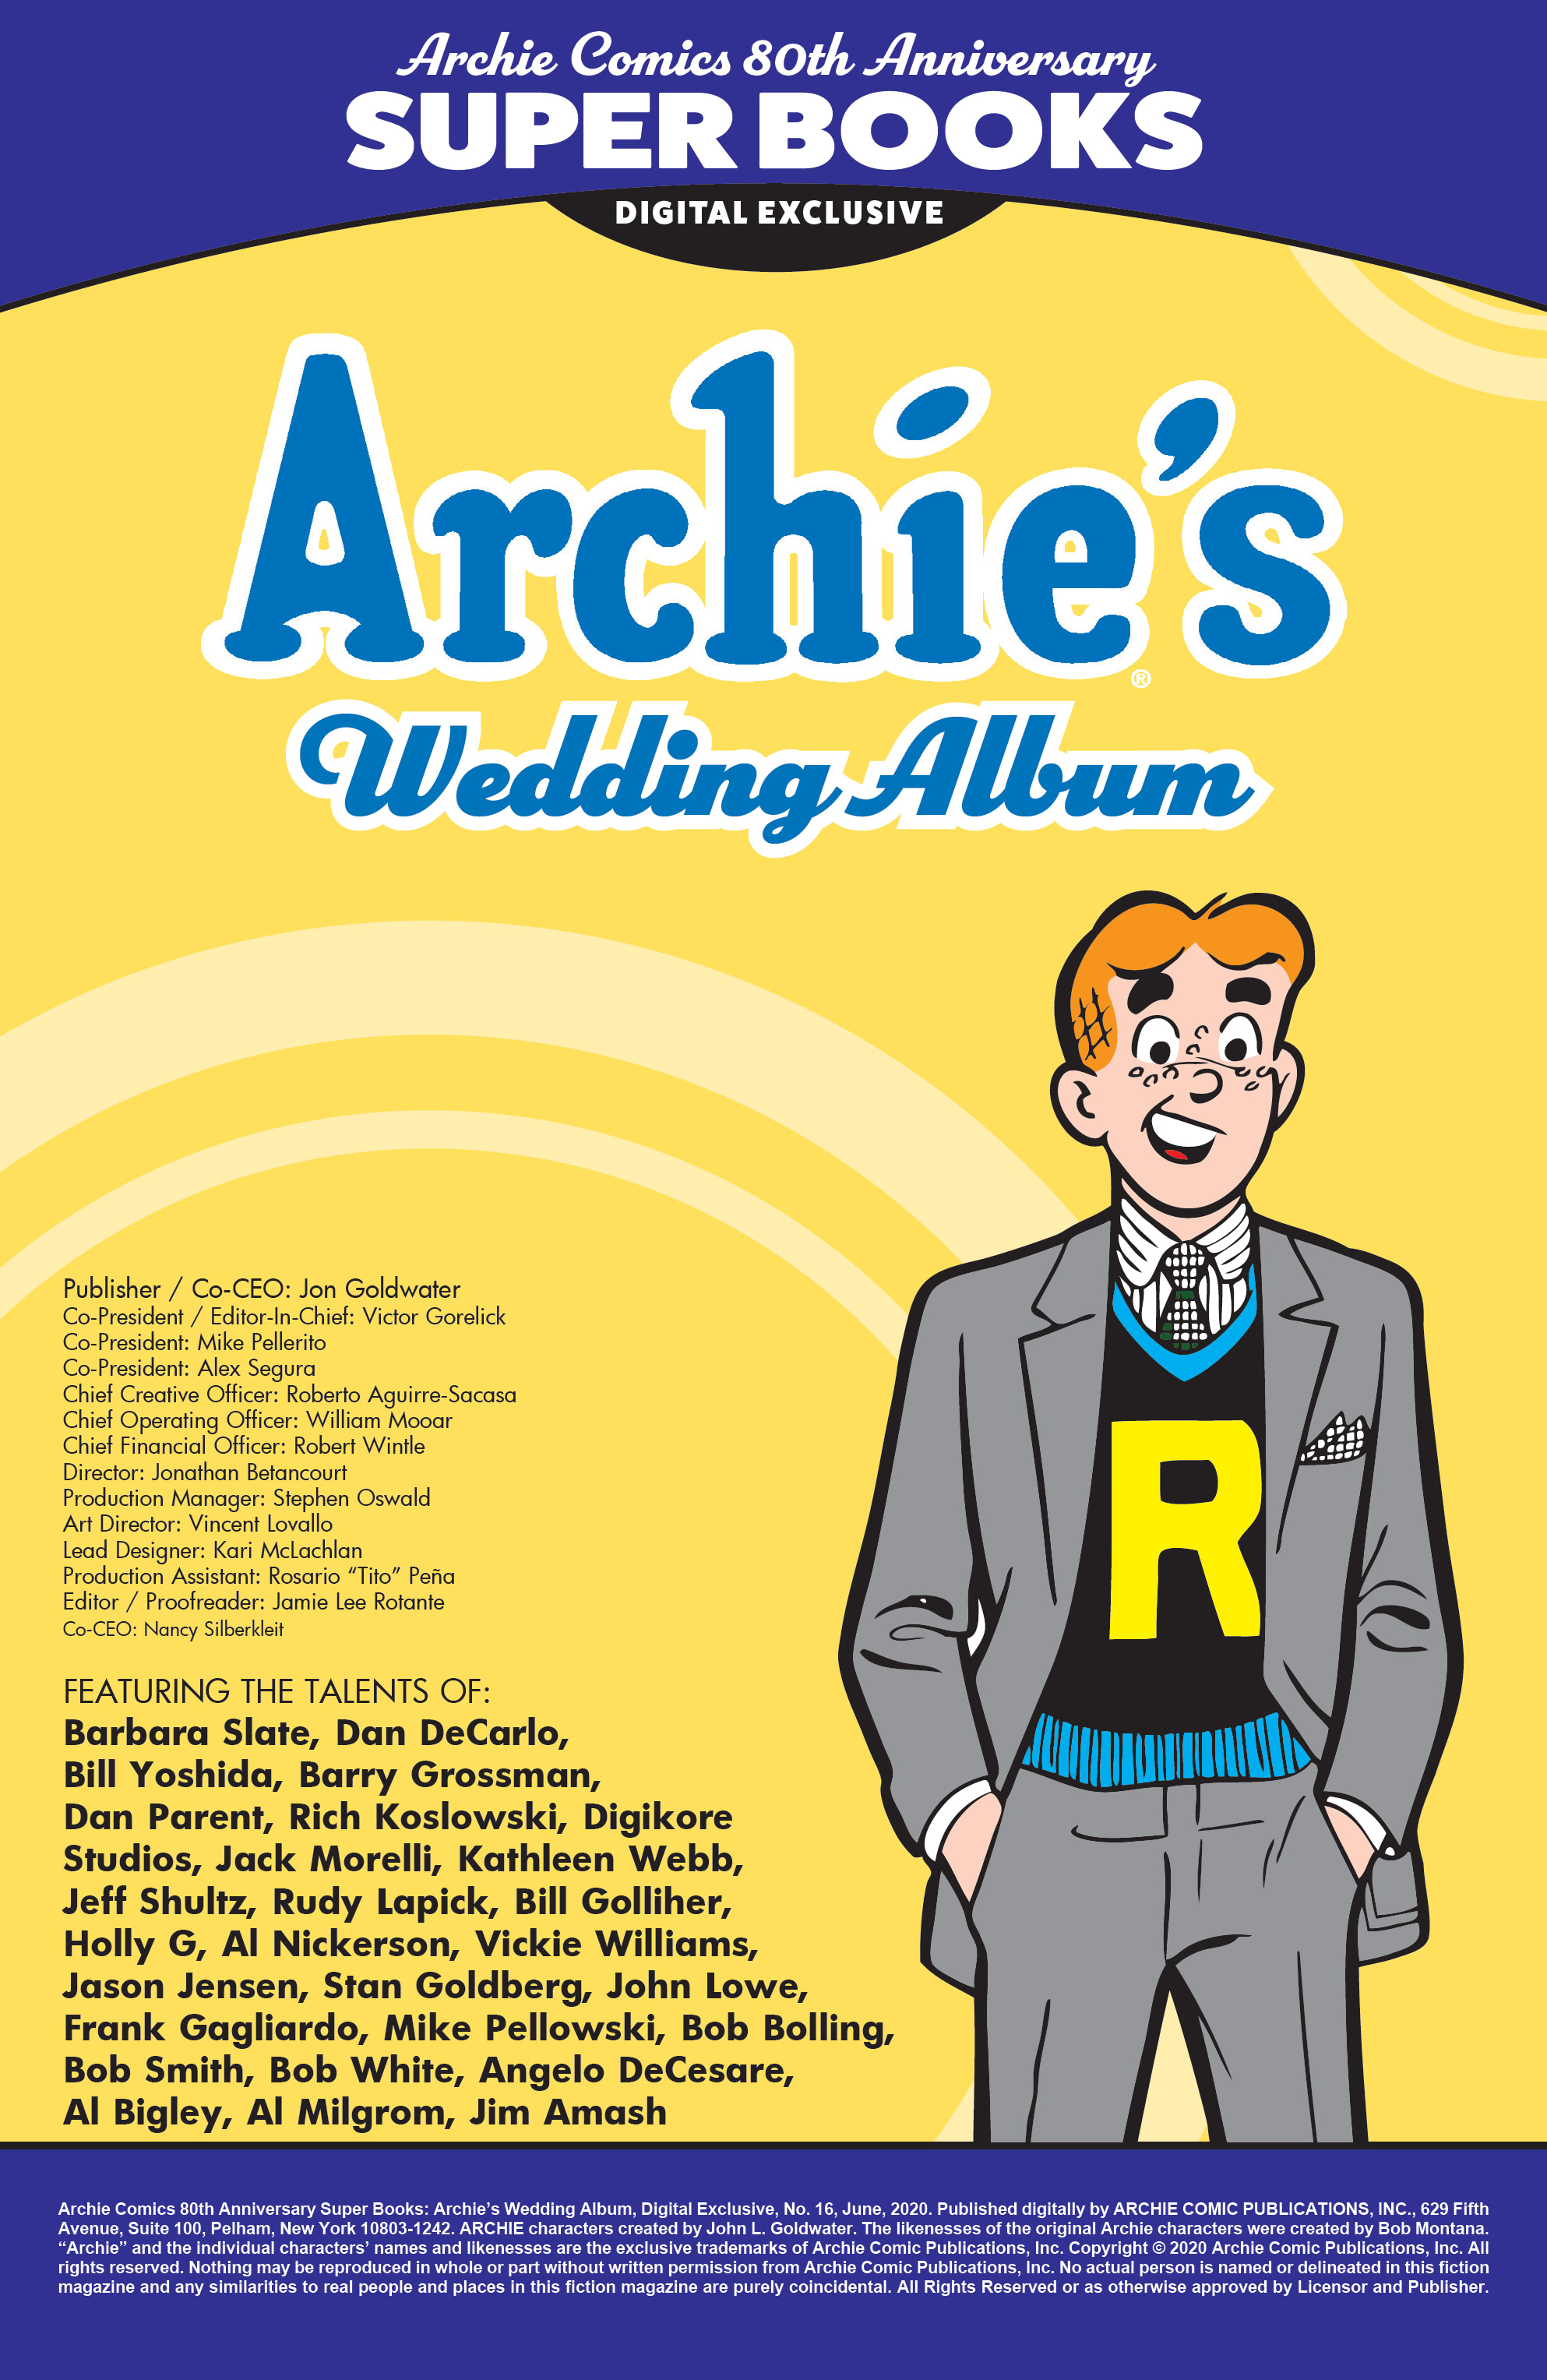 Read online Archie Comics 80th Anniversary Presents comic -  Issue #16 - 2